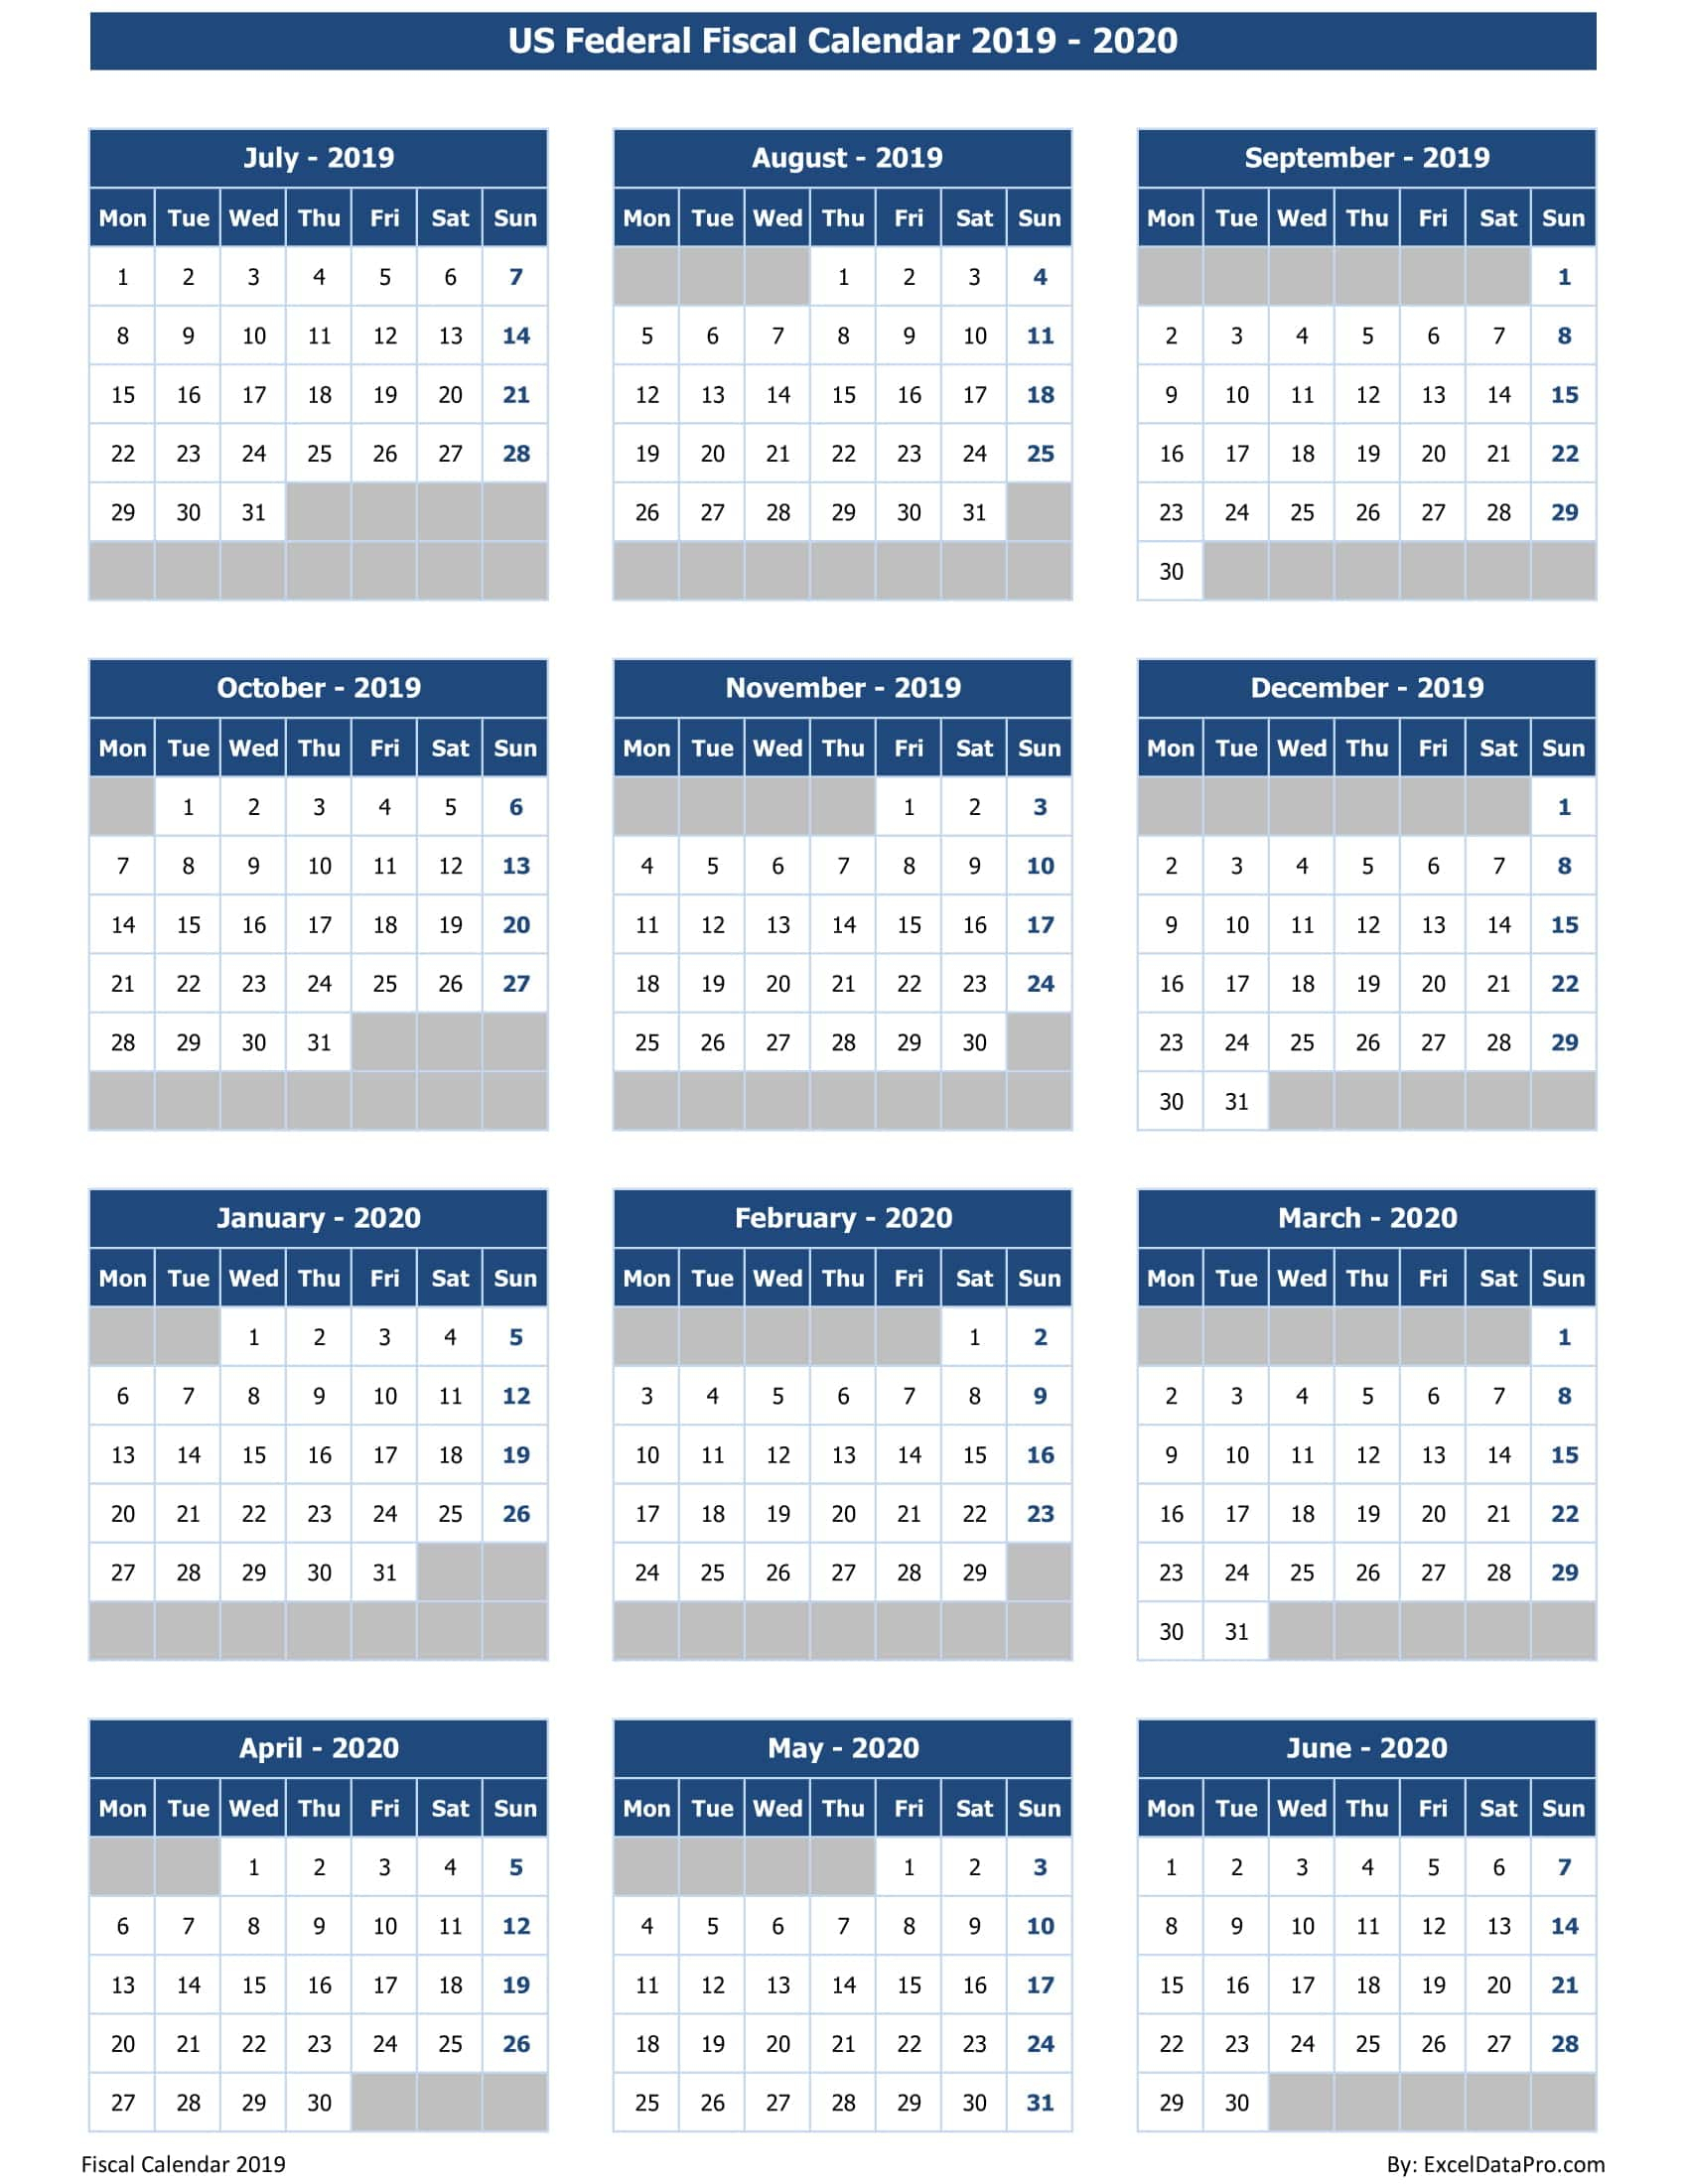 Download Us Federal Fiscal Calendar 2019-20 Excel Template